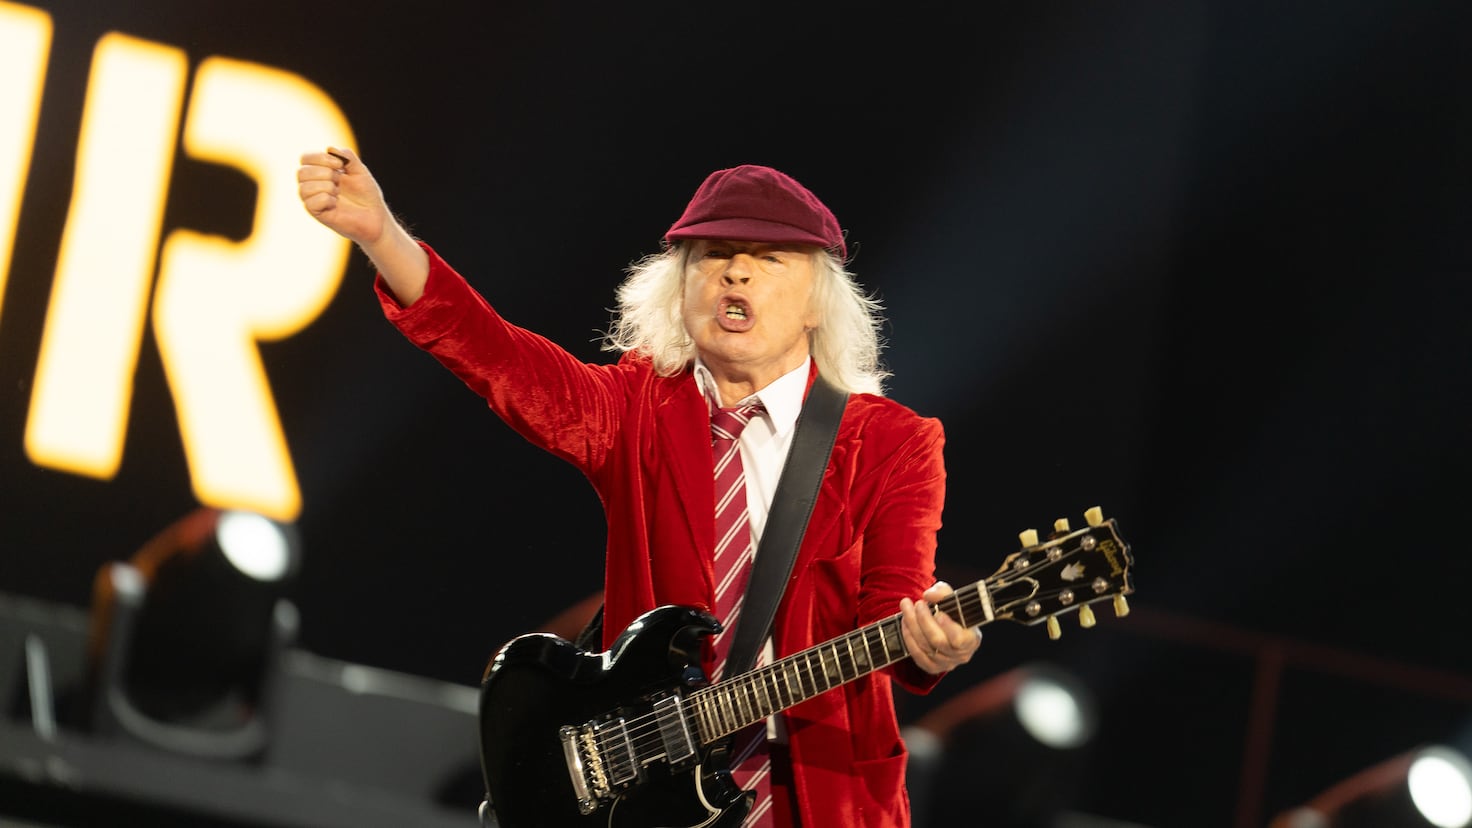 The reason why Angus Young always wears a school uniform at AC/DC concerts
